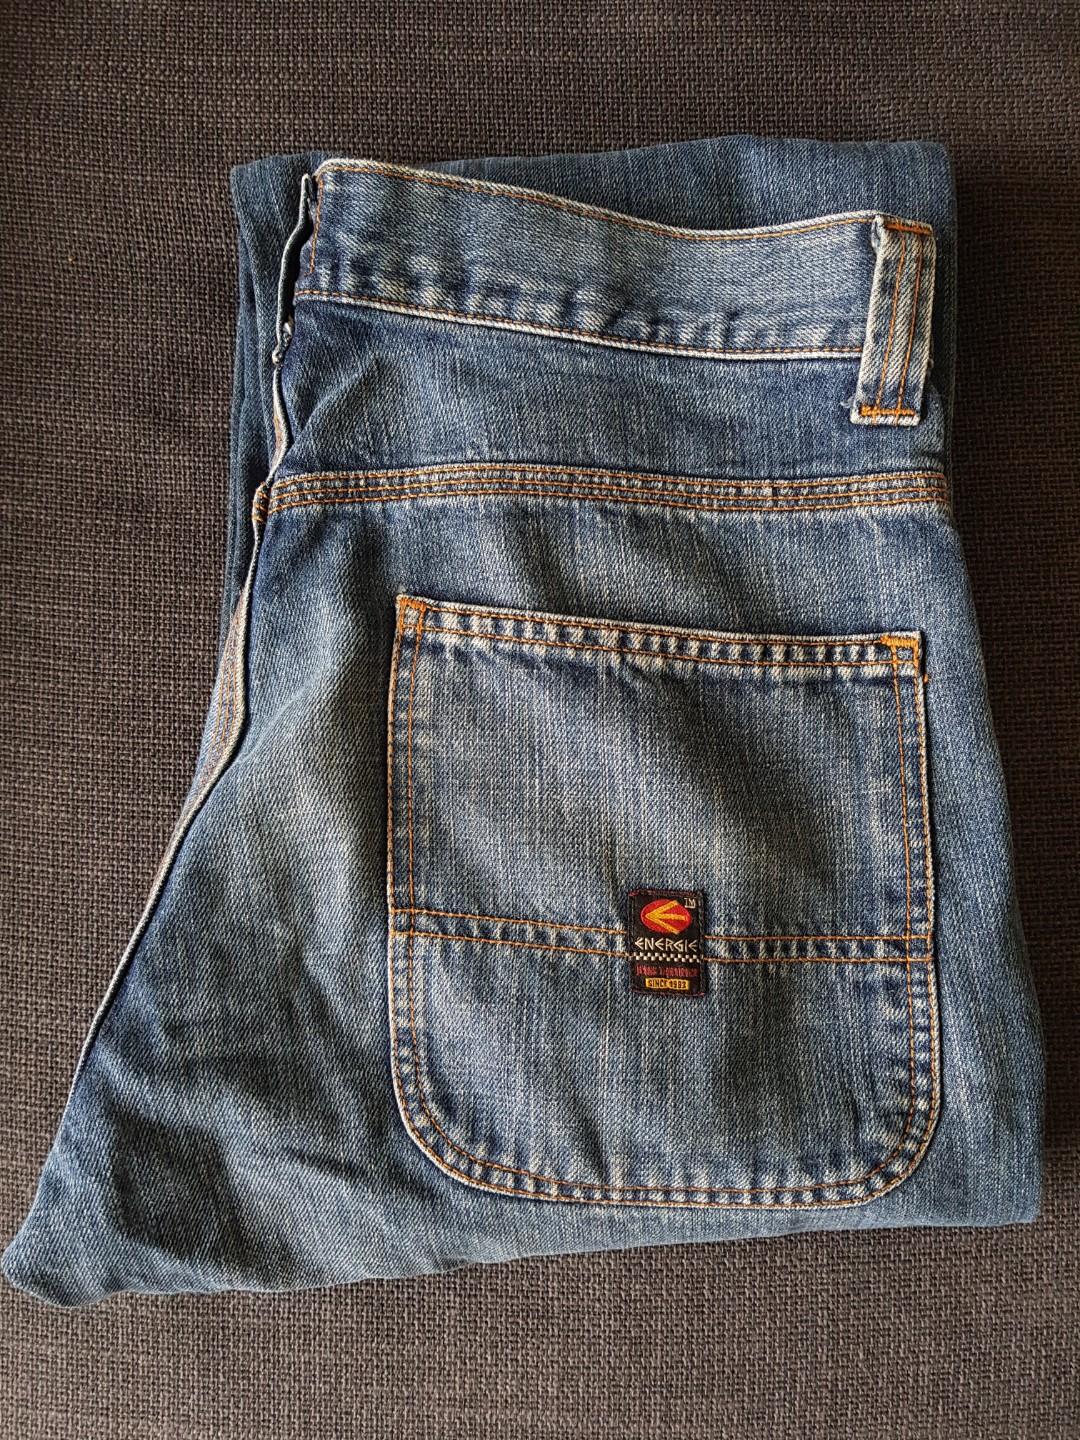 Energie jeans, Men's Fashion, Bottoms, Jeans on Carousell